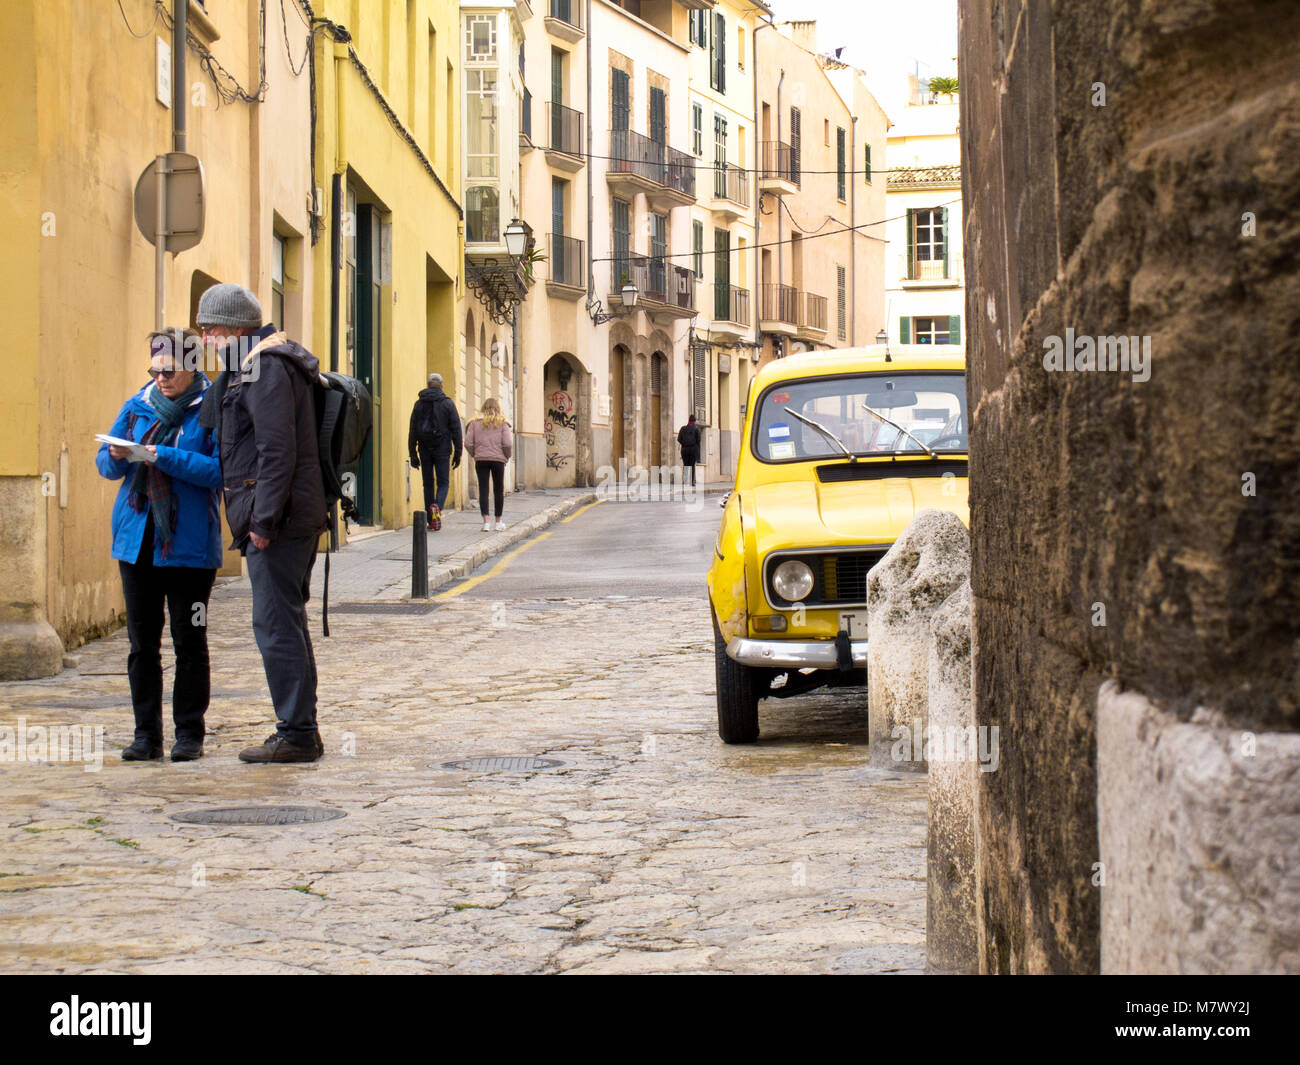 Couple of tourists with hats on looking at map in old cobbled street next to old yellow car Stock Photo